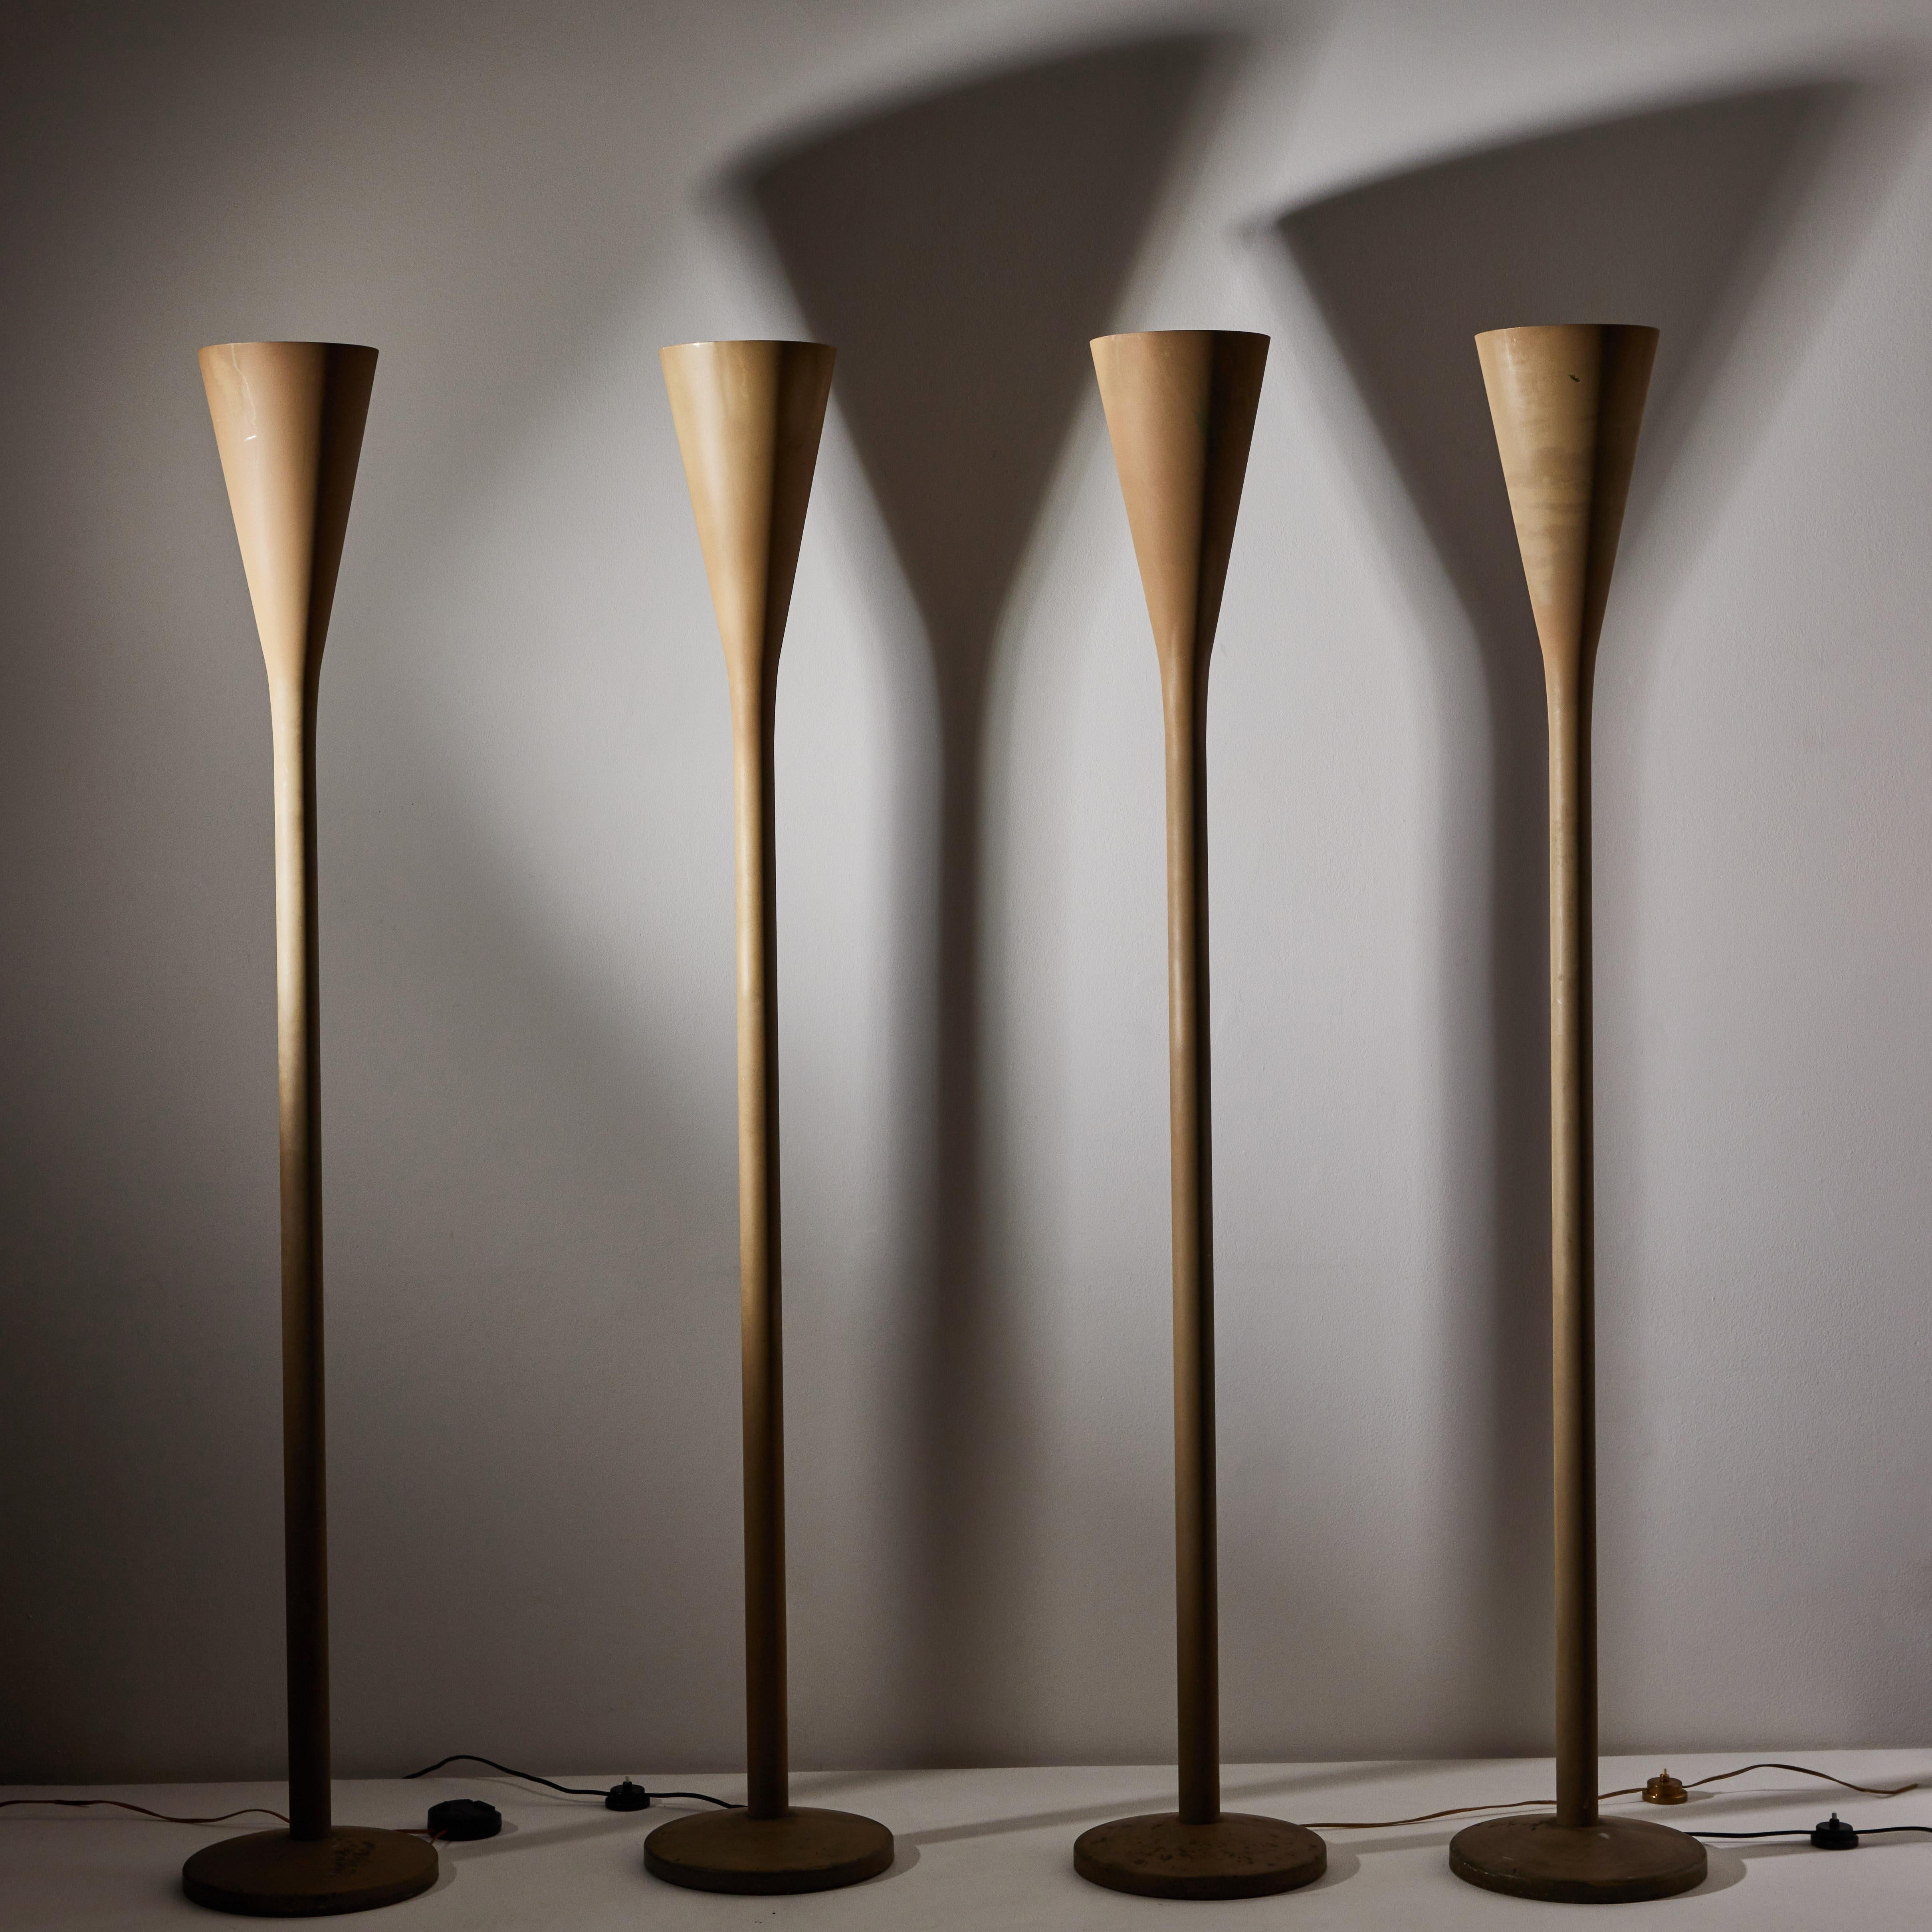 Three luminator floor lamps by Pietro Chiesa for Fontana Arte. Designed and manufactured in Italy, circa 1930's. Painted aluminum, original European cord.
Lightbulbs not included. Suggested Lamping: 1 Qty 120V E27 75w frosted bulb. Literature: Domus